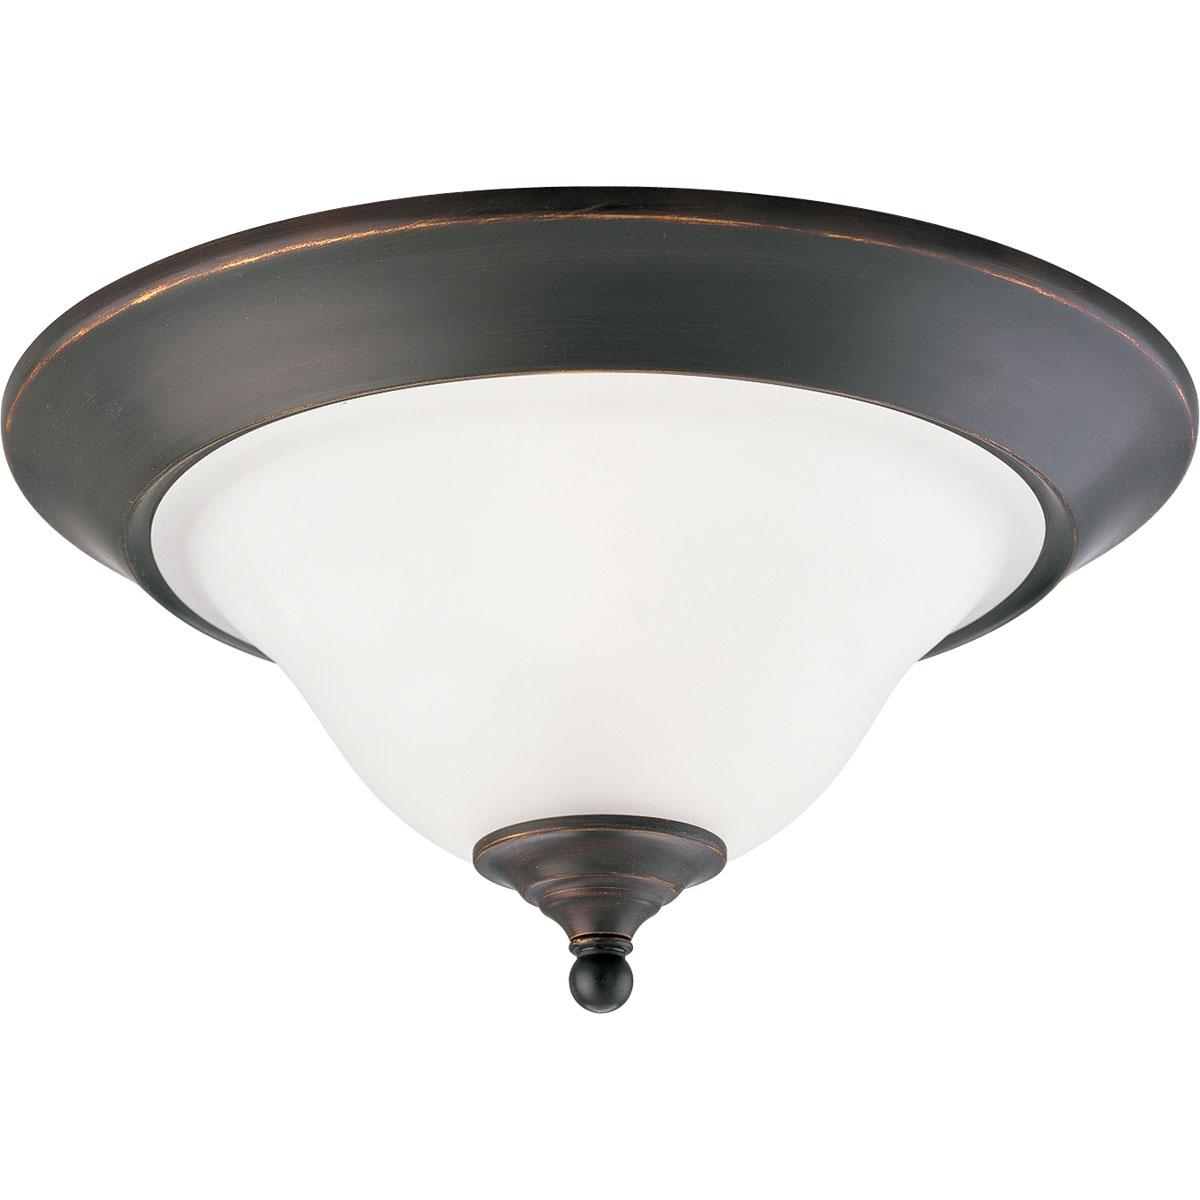 Hubbell P3476-20 Two-light close-to-ceiling fixture featuring soft angles, curving lines and etched glass shades. Gracefully exotic, the Trinity Collection offers classic sophistication for transitional interiors. Sculptural forms of metal and glass are enhanced by a clas